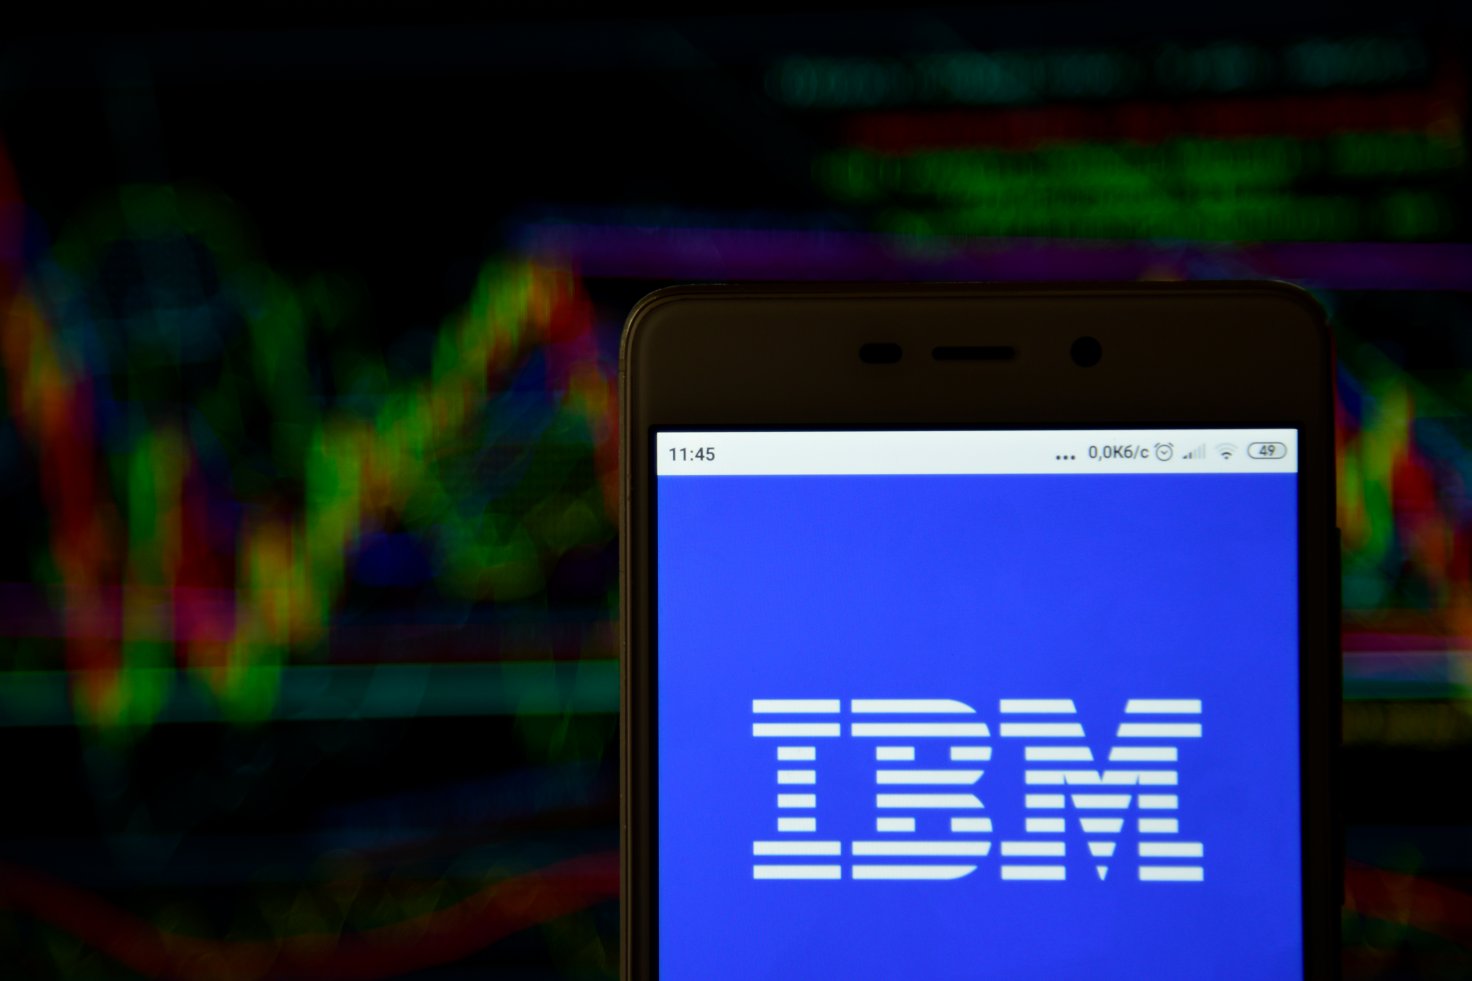 IBM Stock Price Forecast For 2021 [New Research]